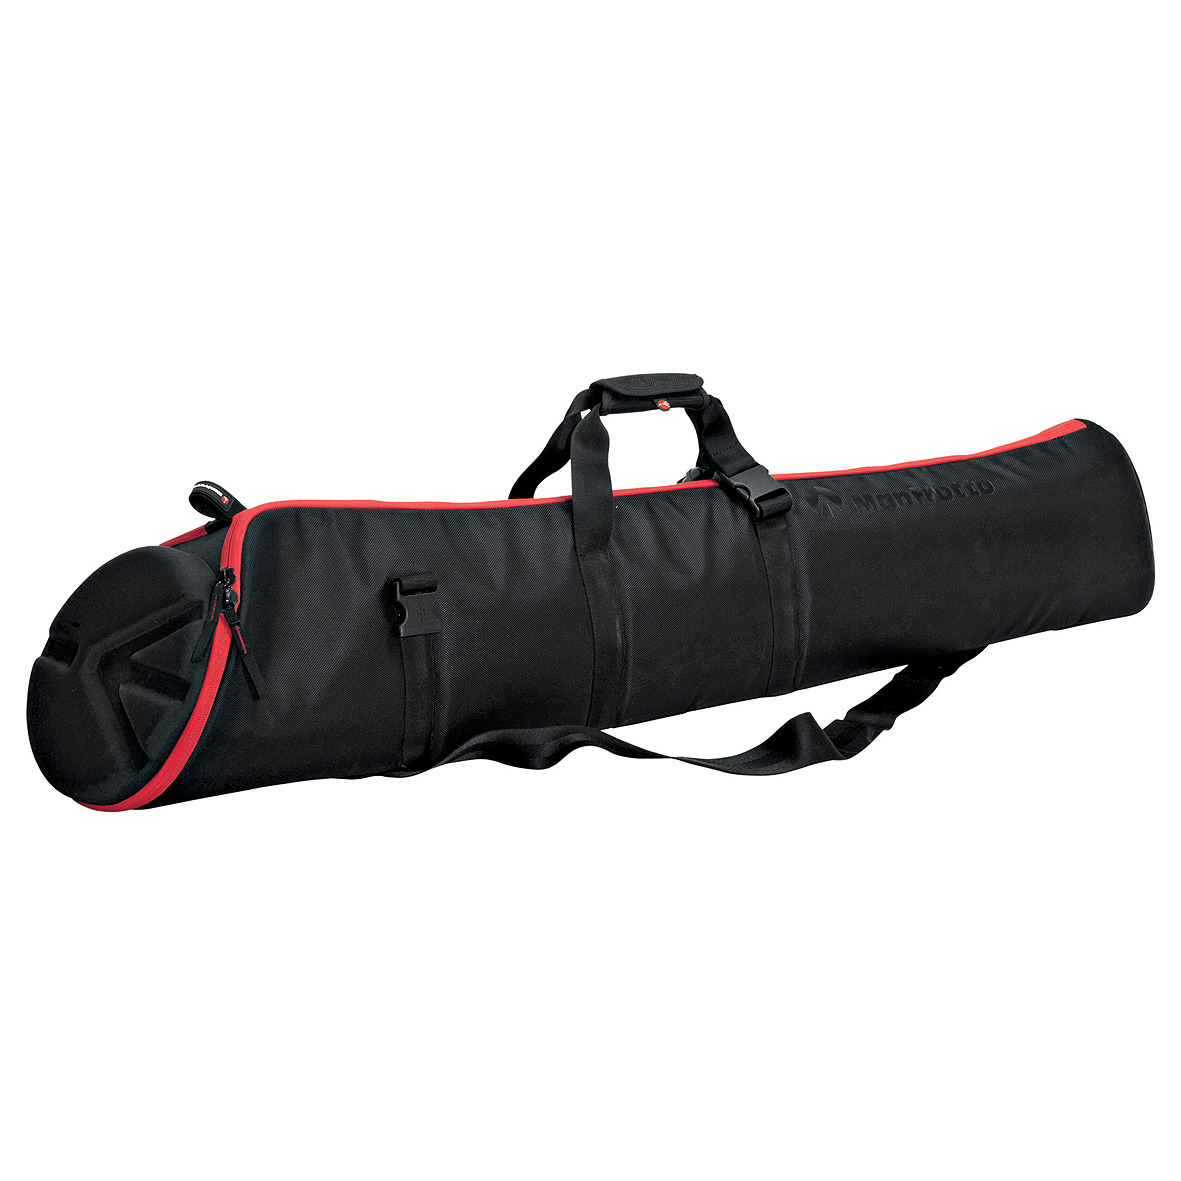 Manfrotto MBAG120PN Padded Tripod Bag 47.2'', bags tripod bags, Manfrotto - Pictureline  - 2